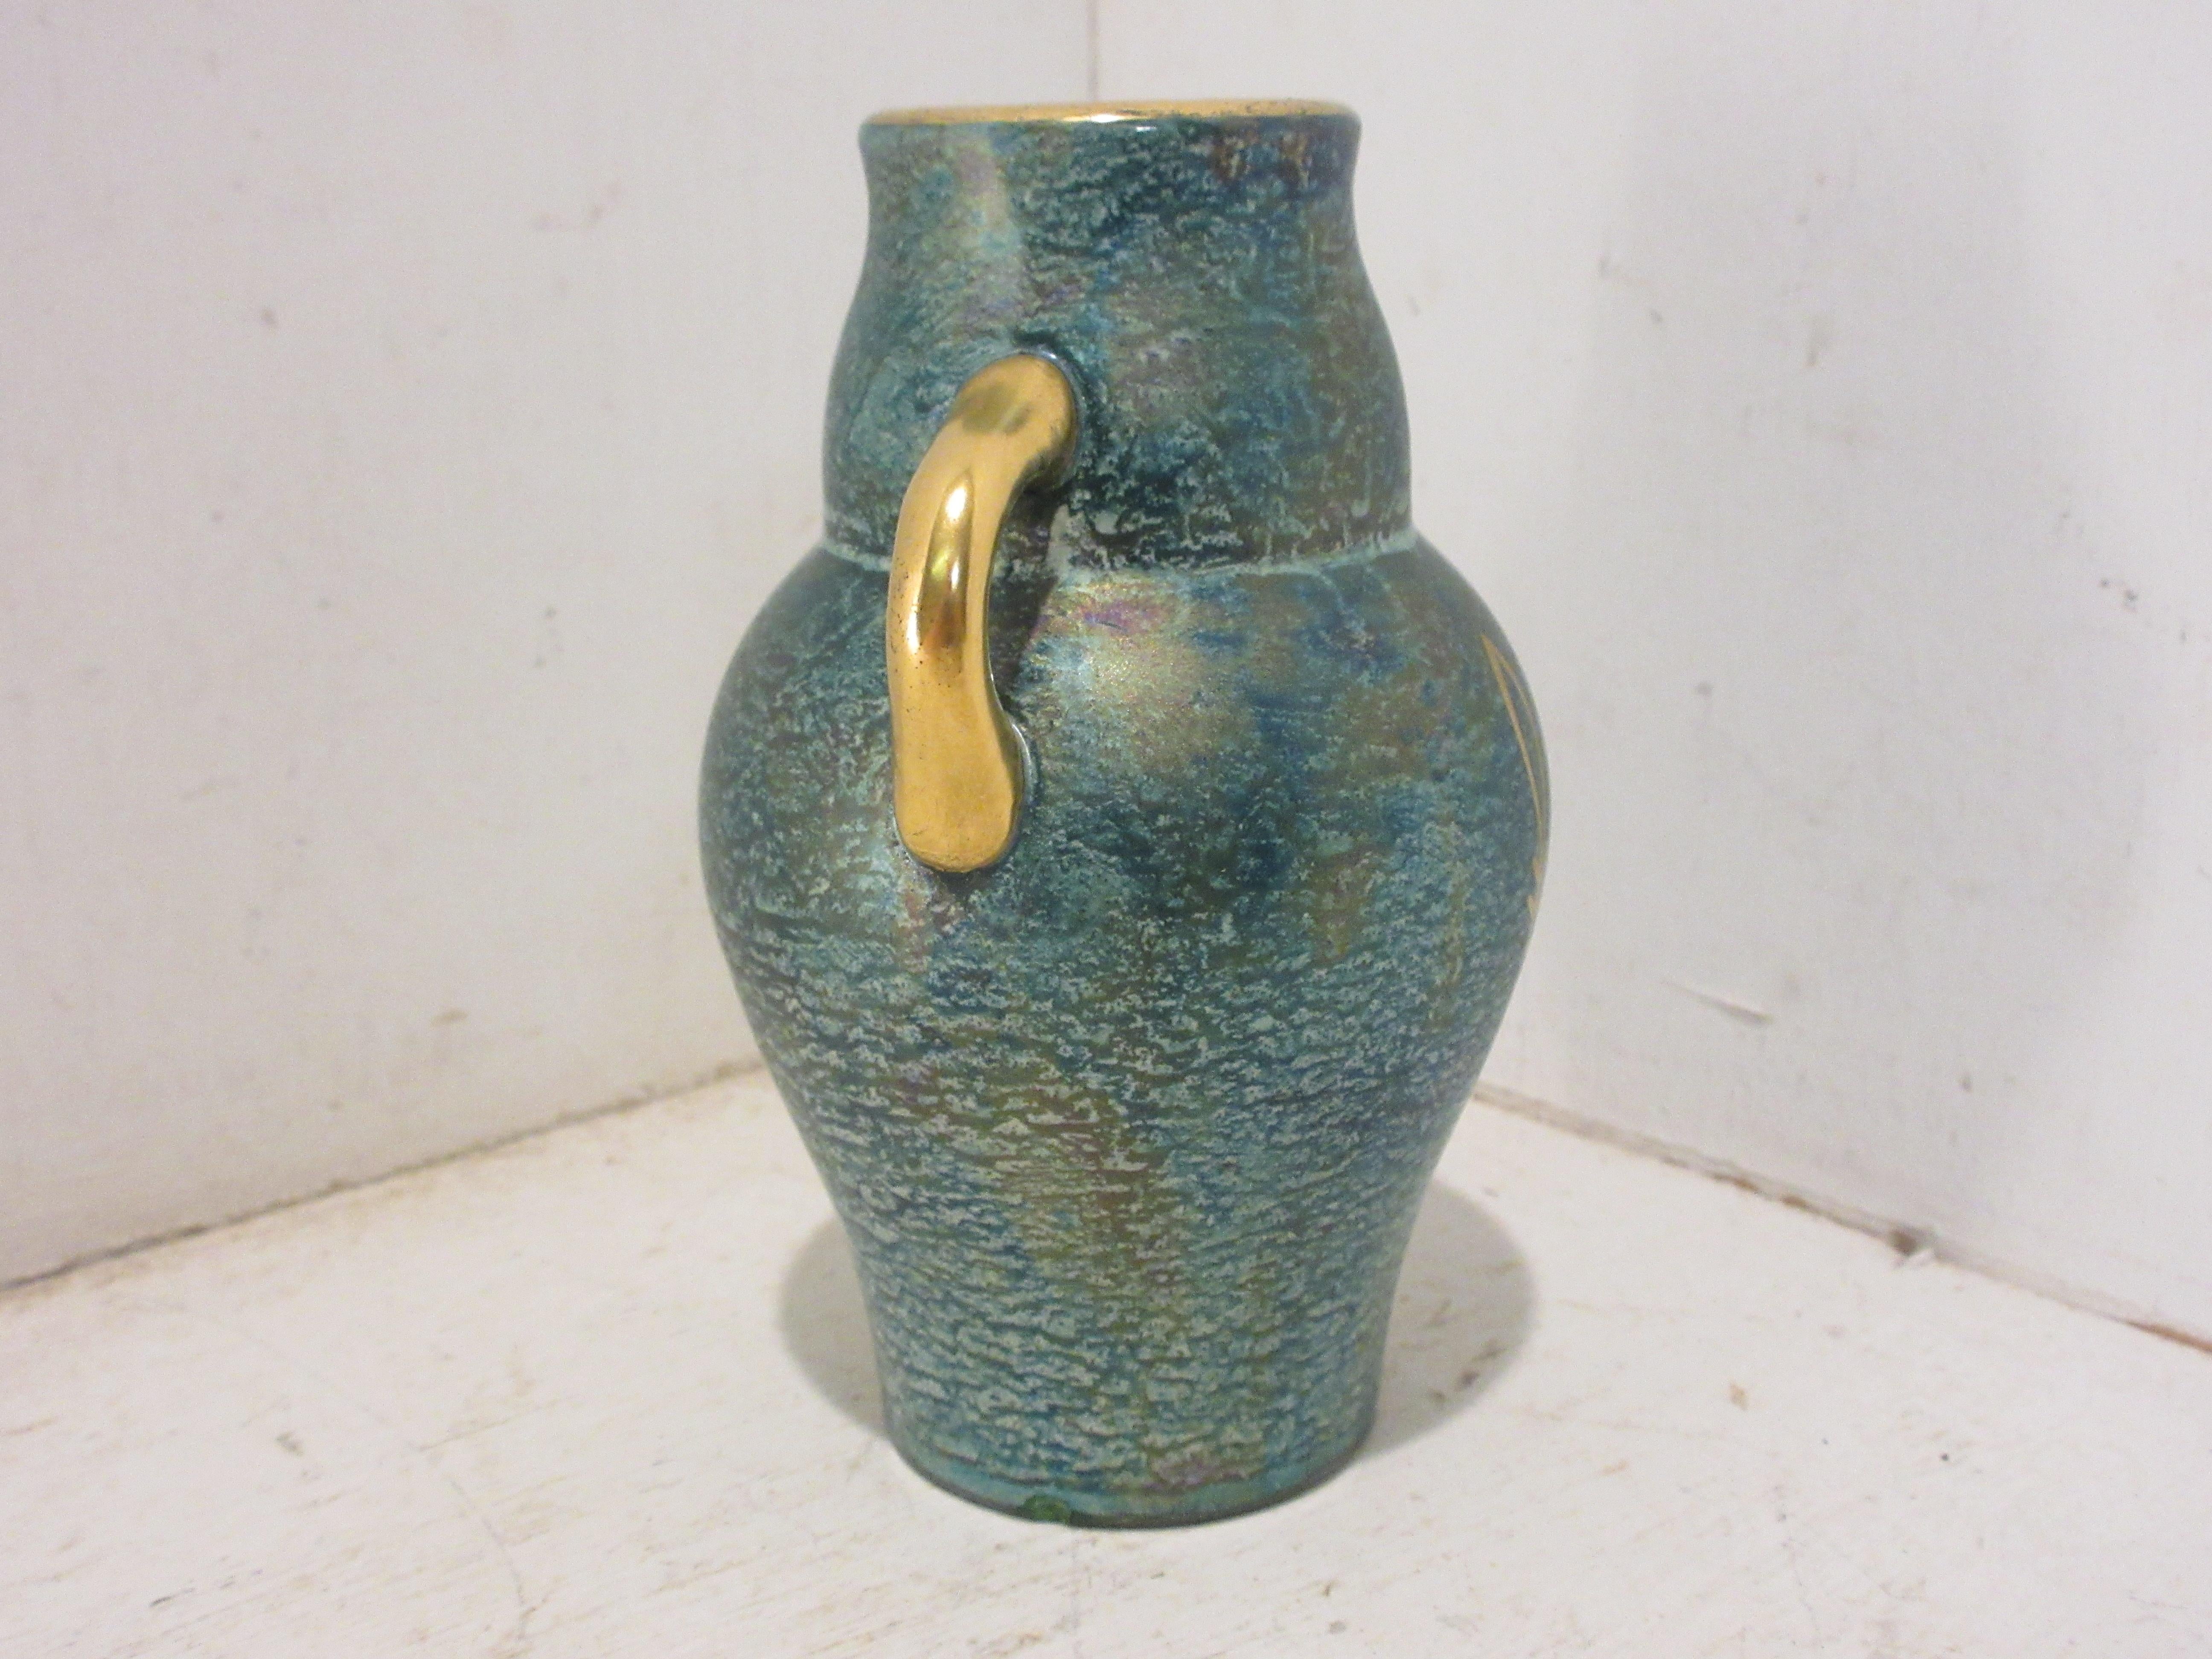 This is a handmade rare Swedish Art Deco ceramic jar in green and gold luster glaze hand decorated with gold made by the Swedish ceramic artist Josef Ekberg. He was one of Sweden's Top Ceramic artist at the time. He started working at the